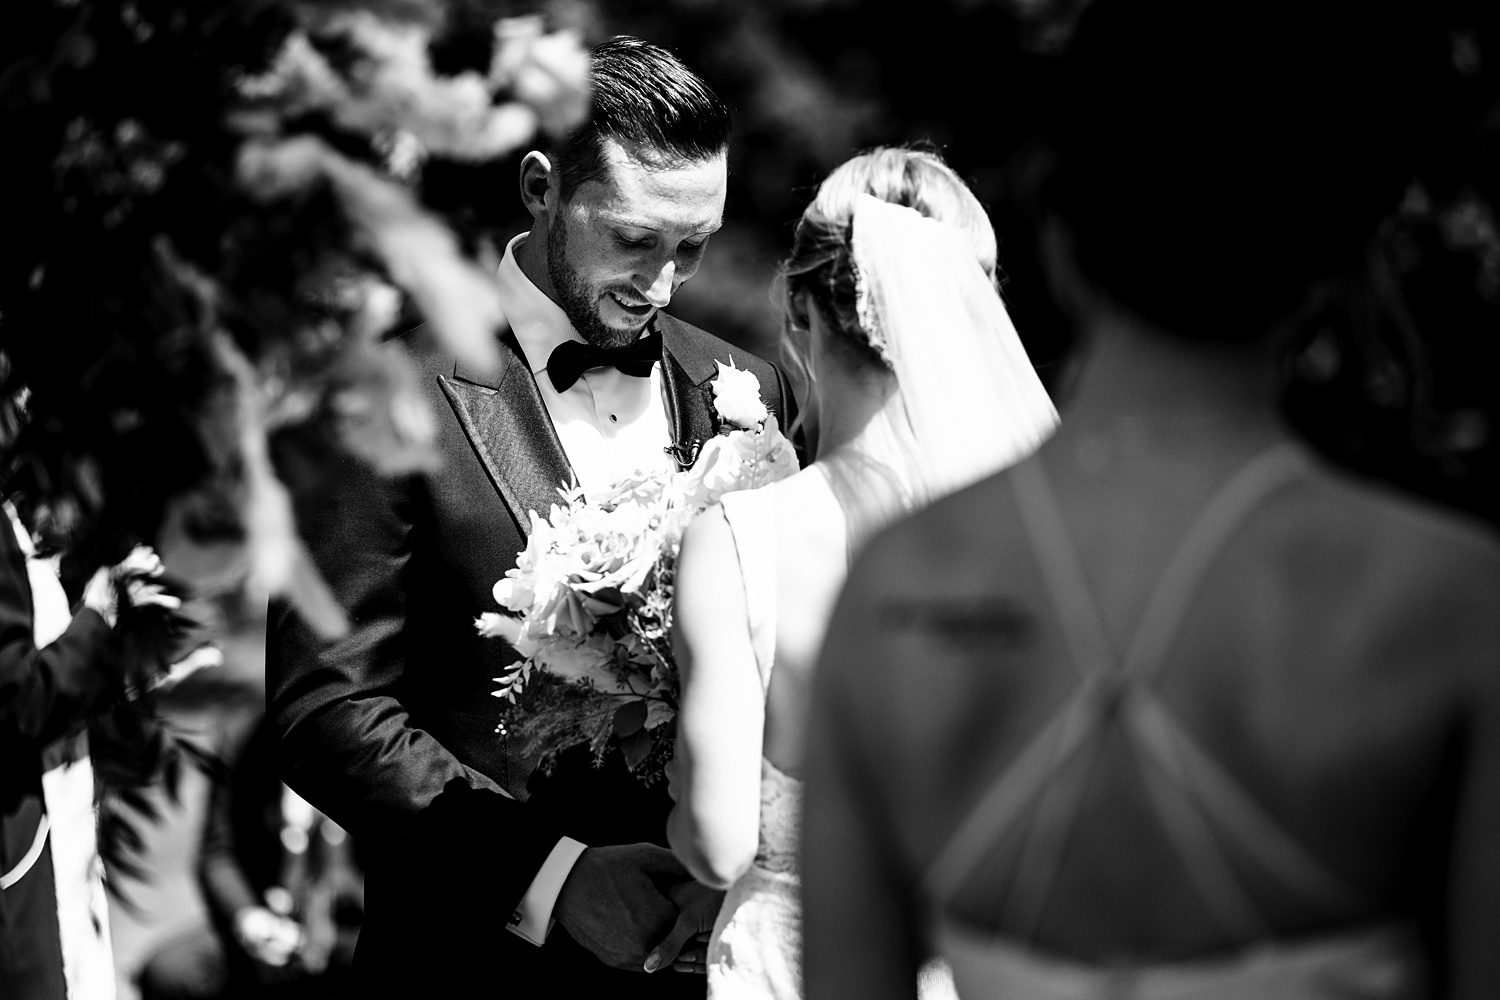 The groom laughs during the outdoor Maine wedding ceremony